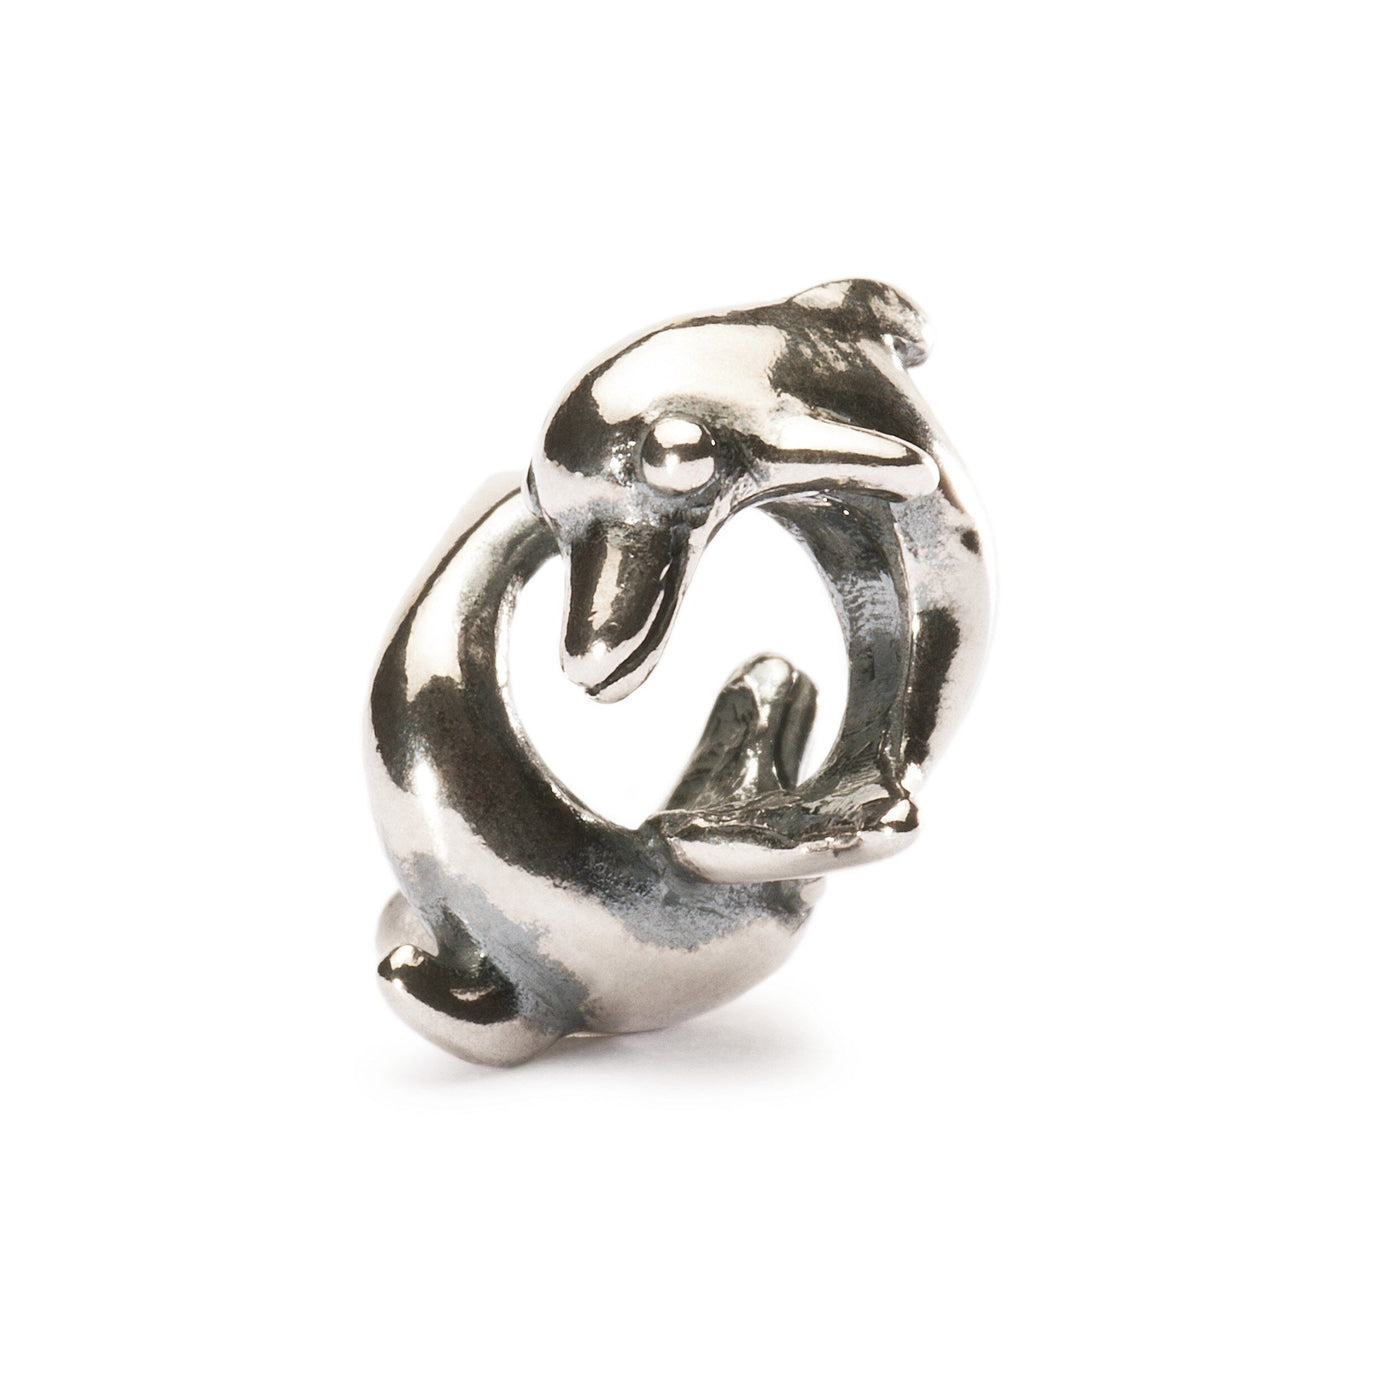 Dolphins playing silver jewellery bead